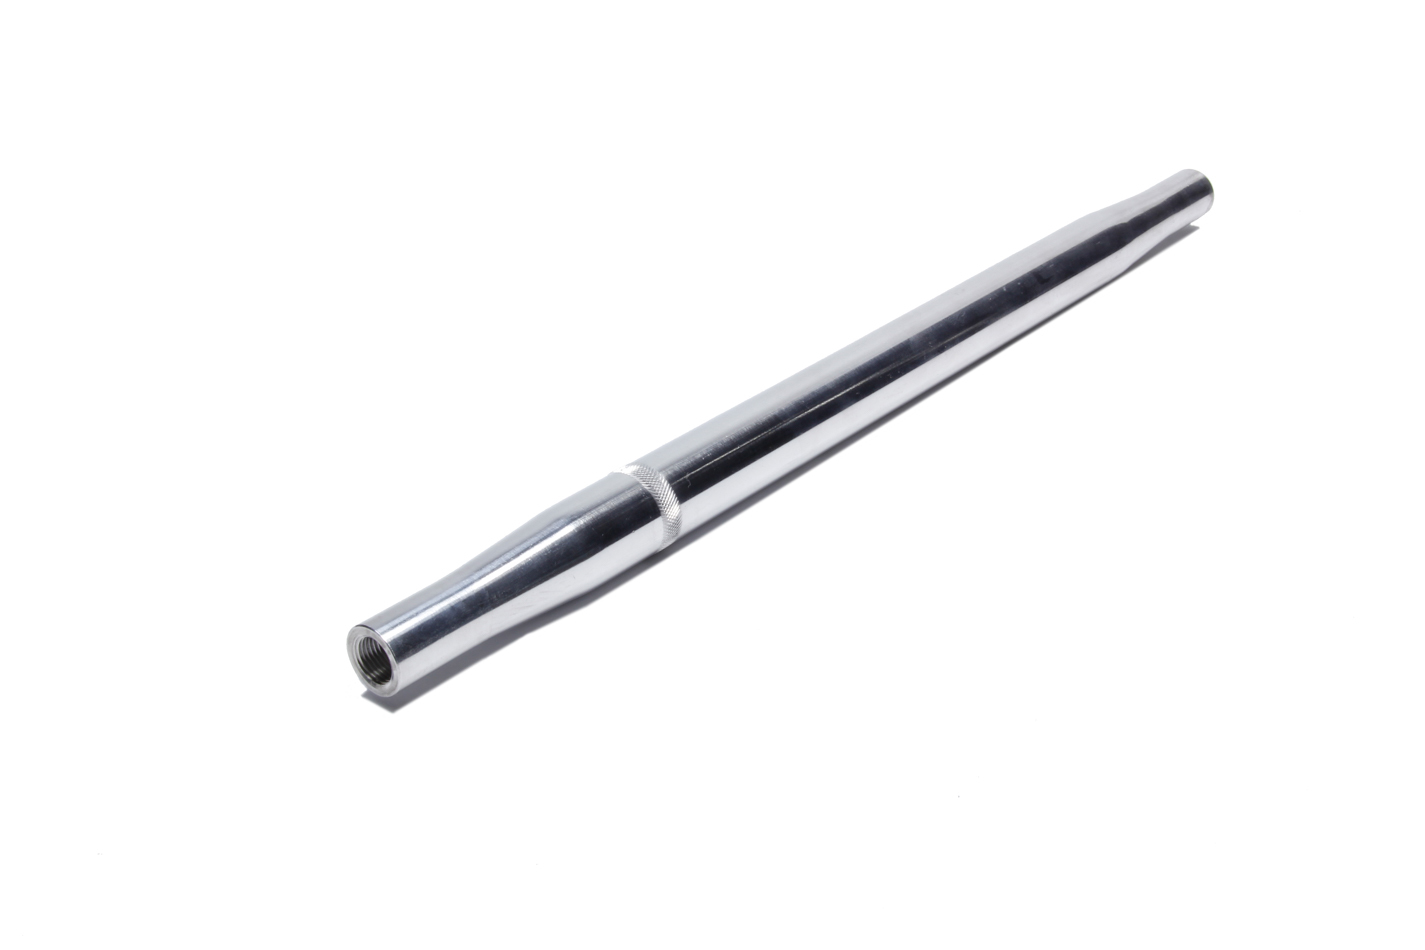 M AND W ALUMINUM PRODUCTS Swaged Rod 1in x 22.5in. 5/8in. Thread P/N - SR-22.5-POL